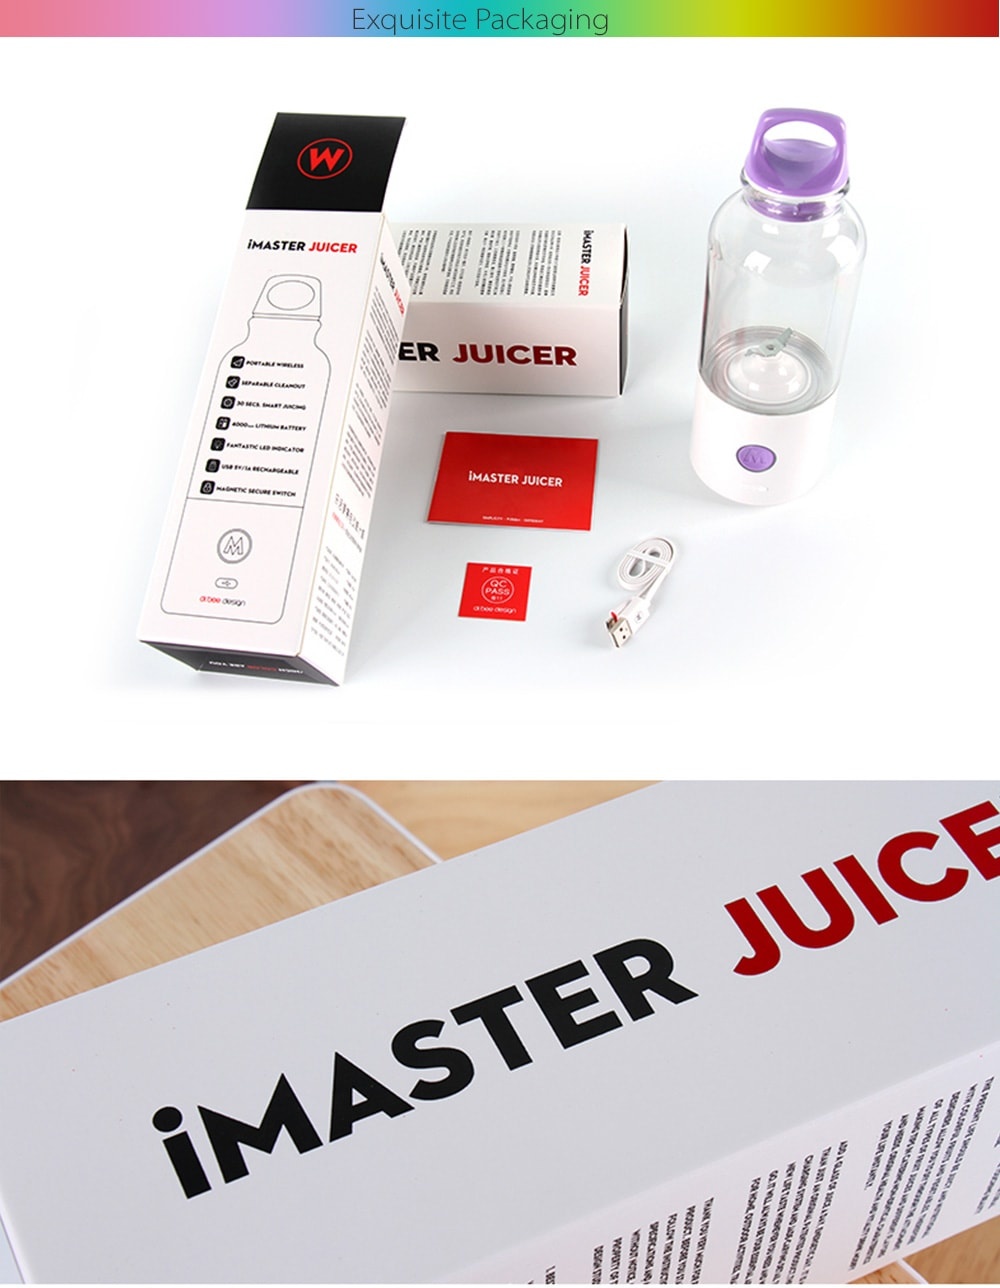 Self Blending Juicer Cup from Apollo Box